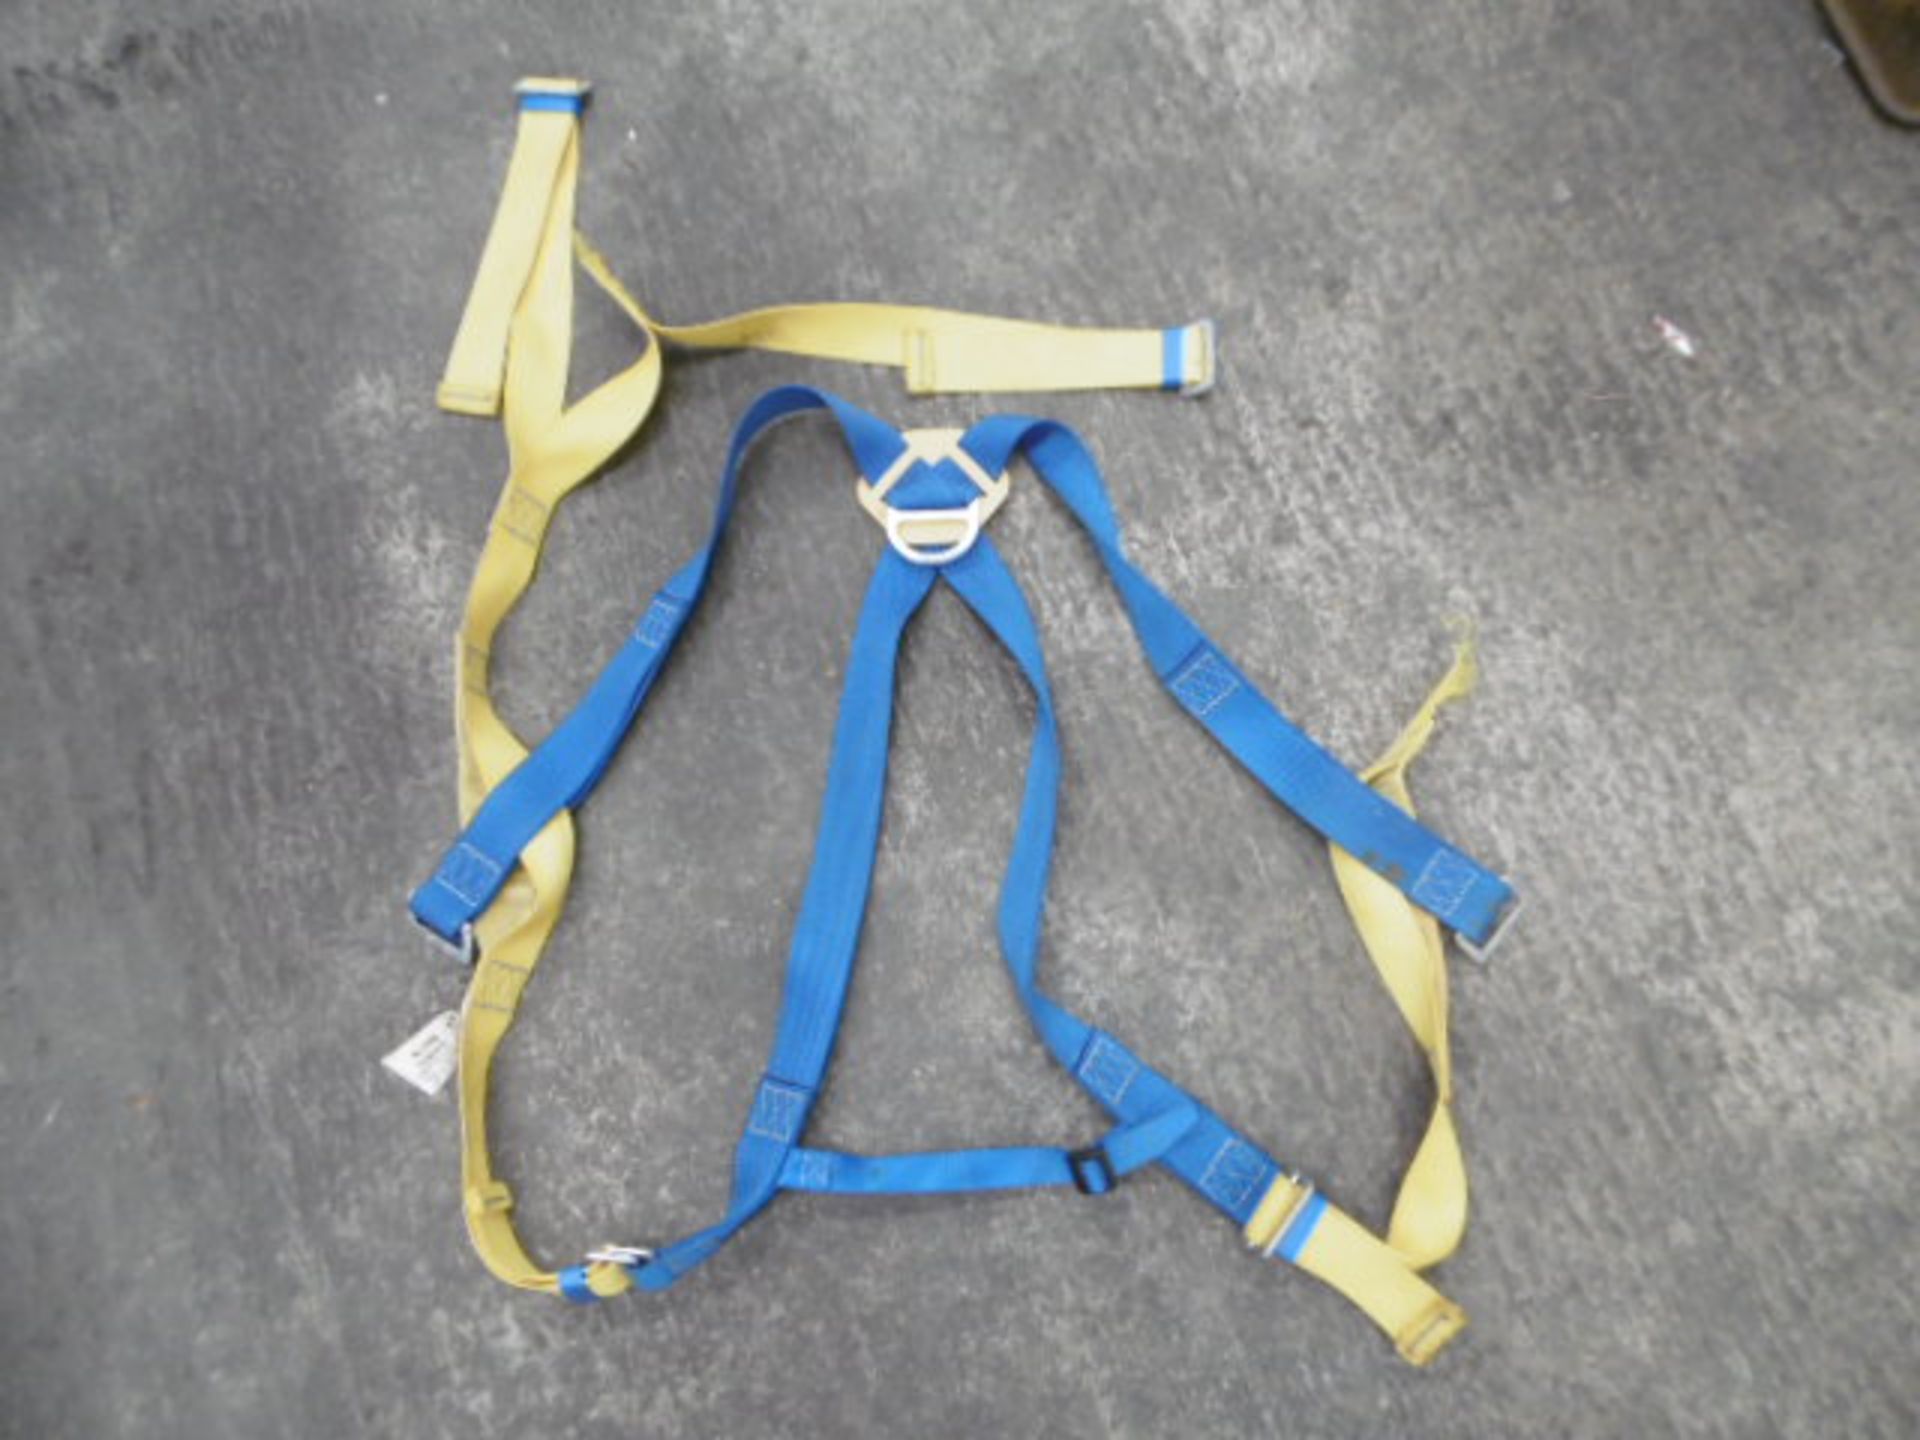 5 x Sala N-100 Sure Fit Harnesses - Image 2 of 4